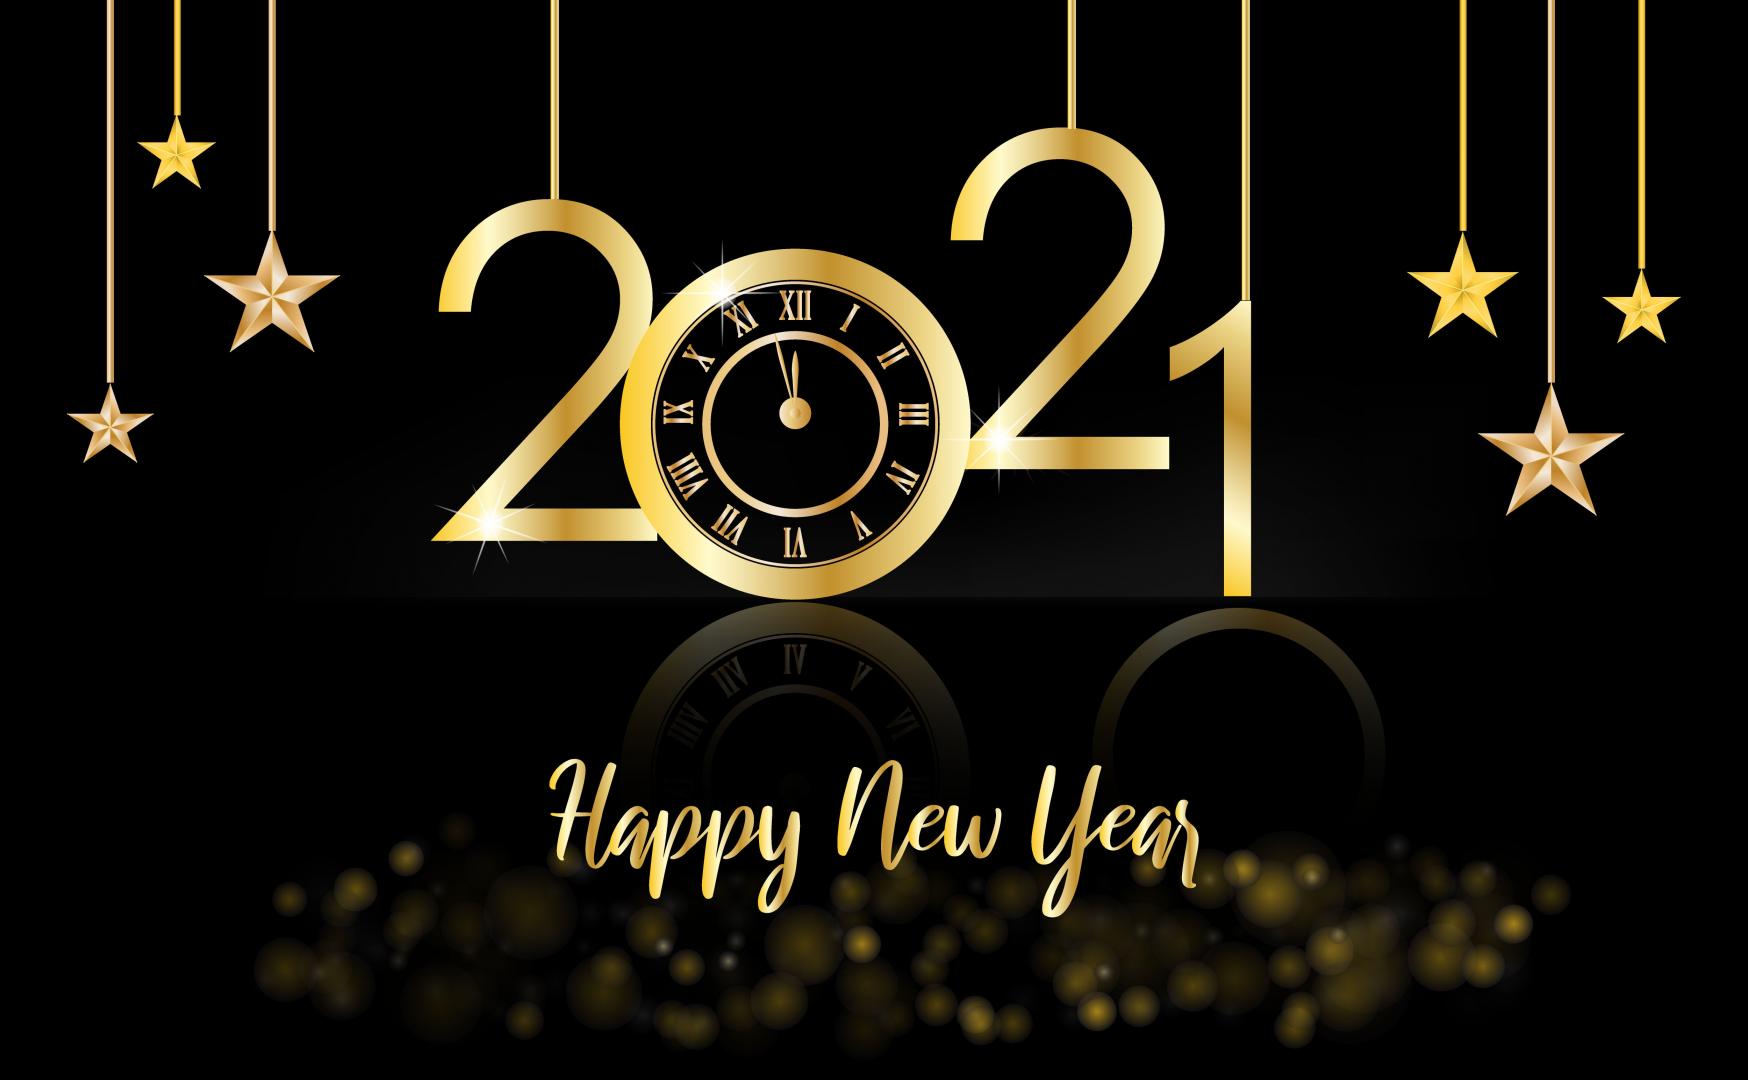 happy-new-year-2021-gold-and-black-background-with-a-clock-and-stars-vector